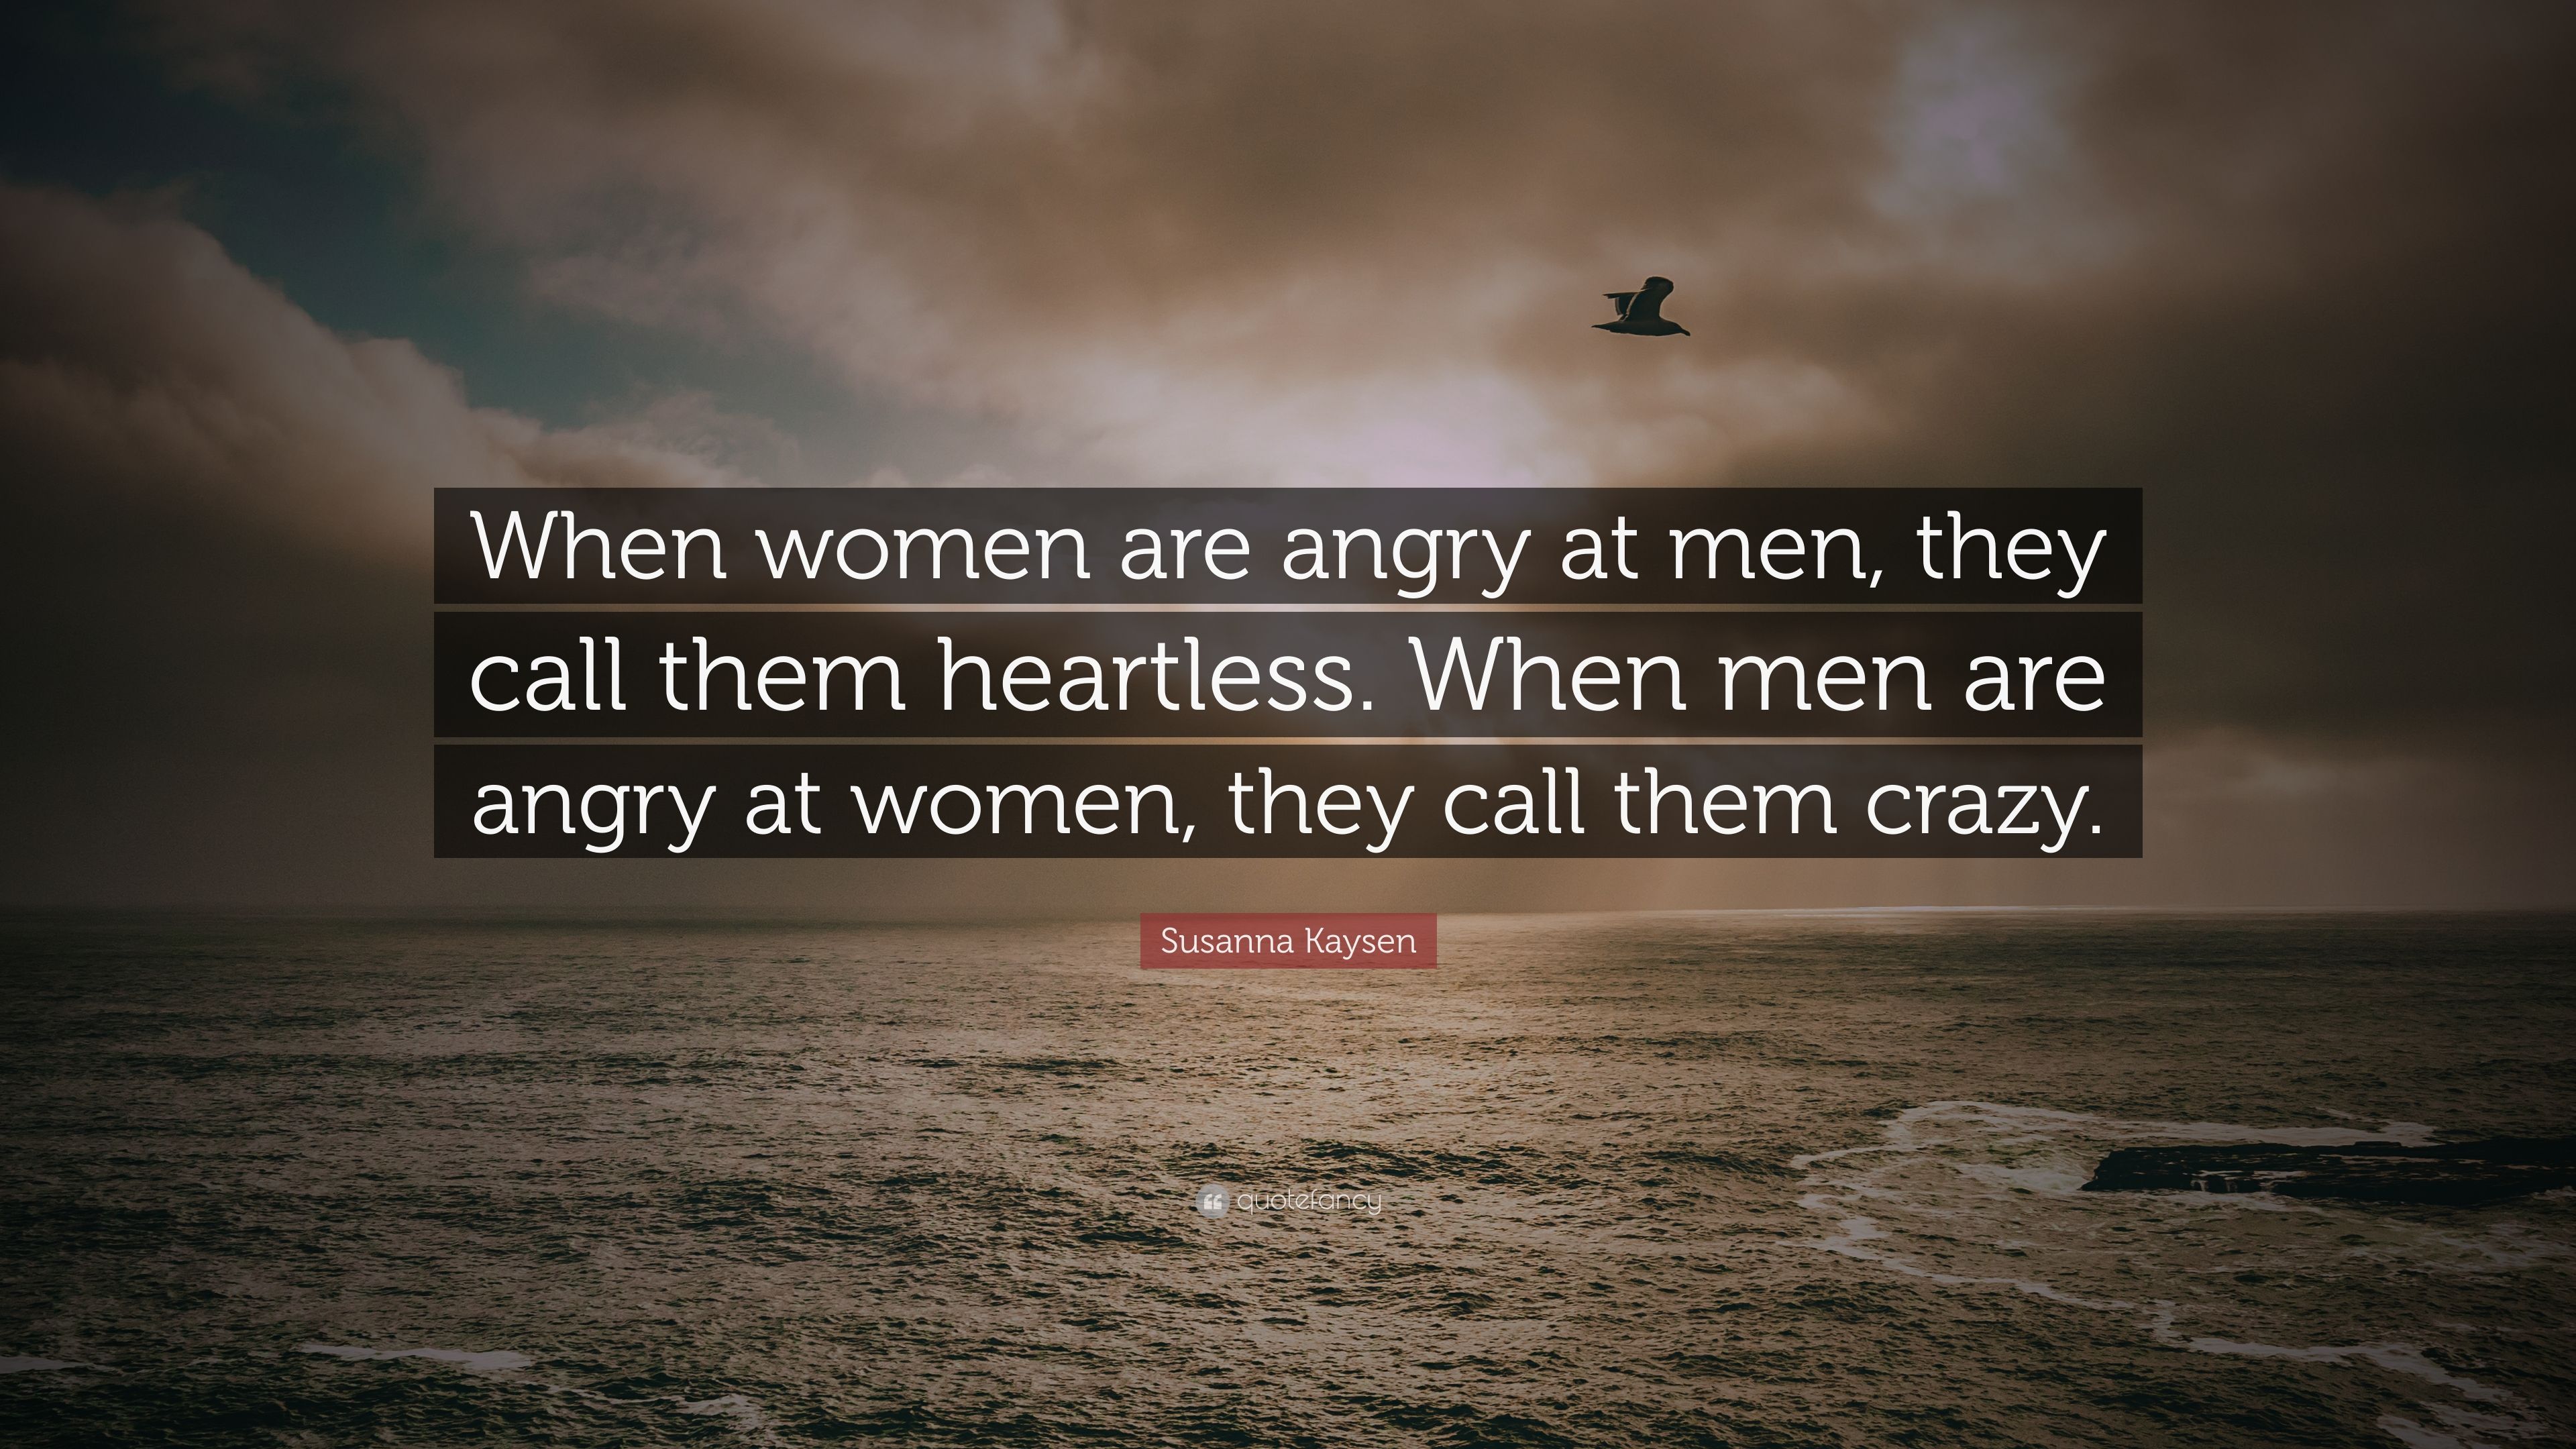 Susanna Kaysen Quote: “When women are angry at men, they call them